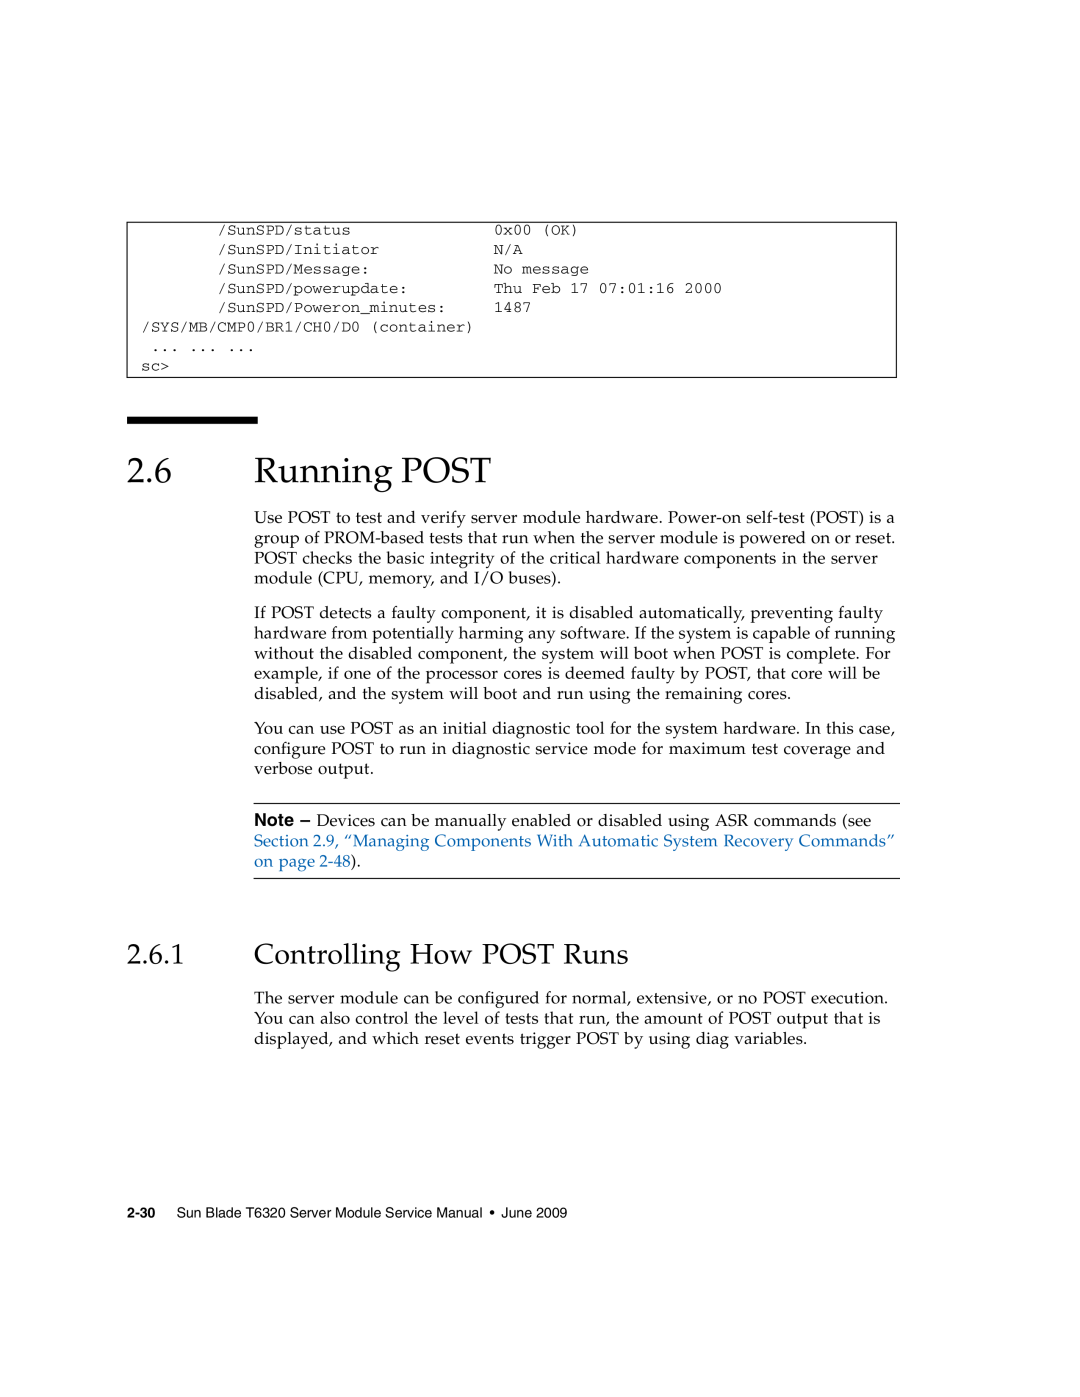 Sun Microsystems T6320 service manual Running POST, Controlling How POST Runs 